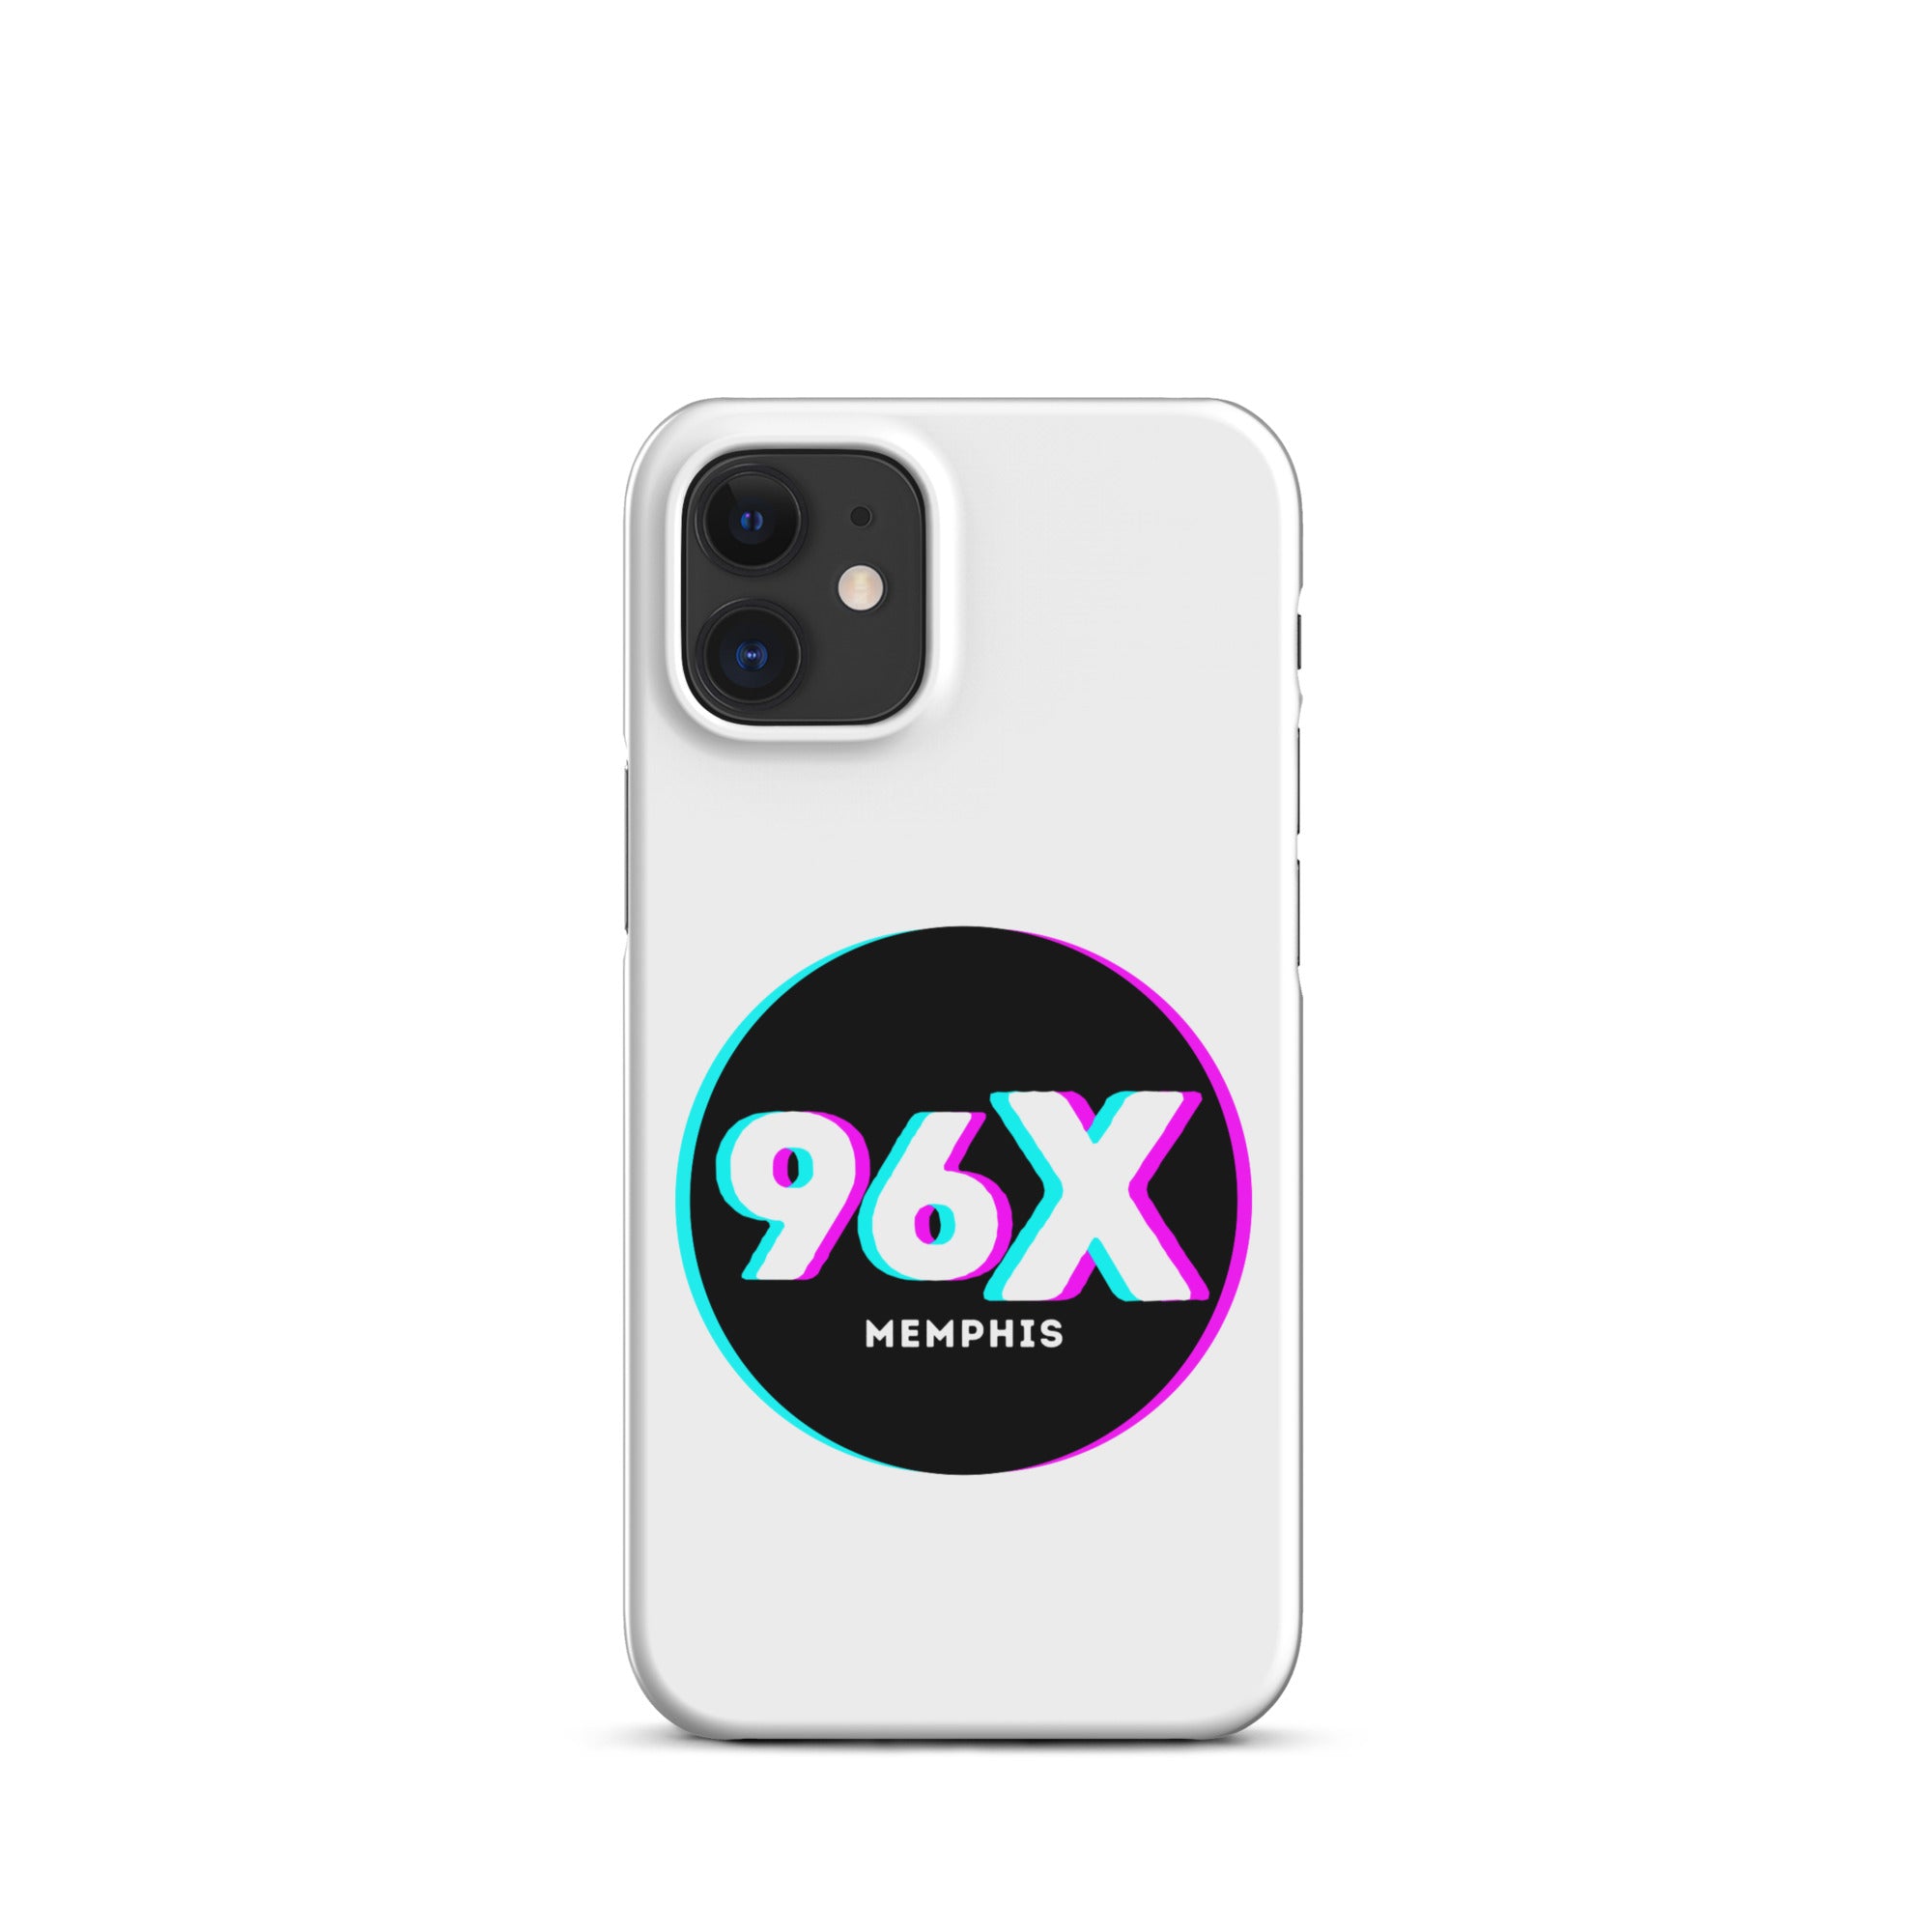 96X Snap case for iPhone®